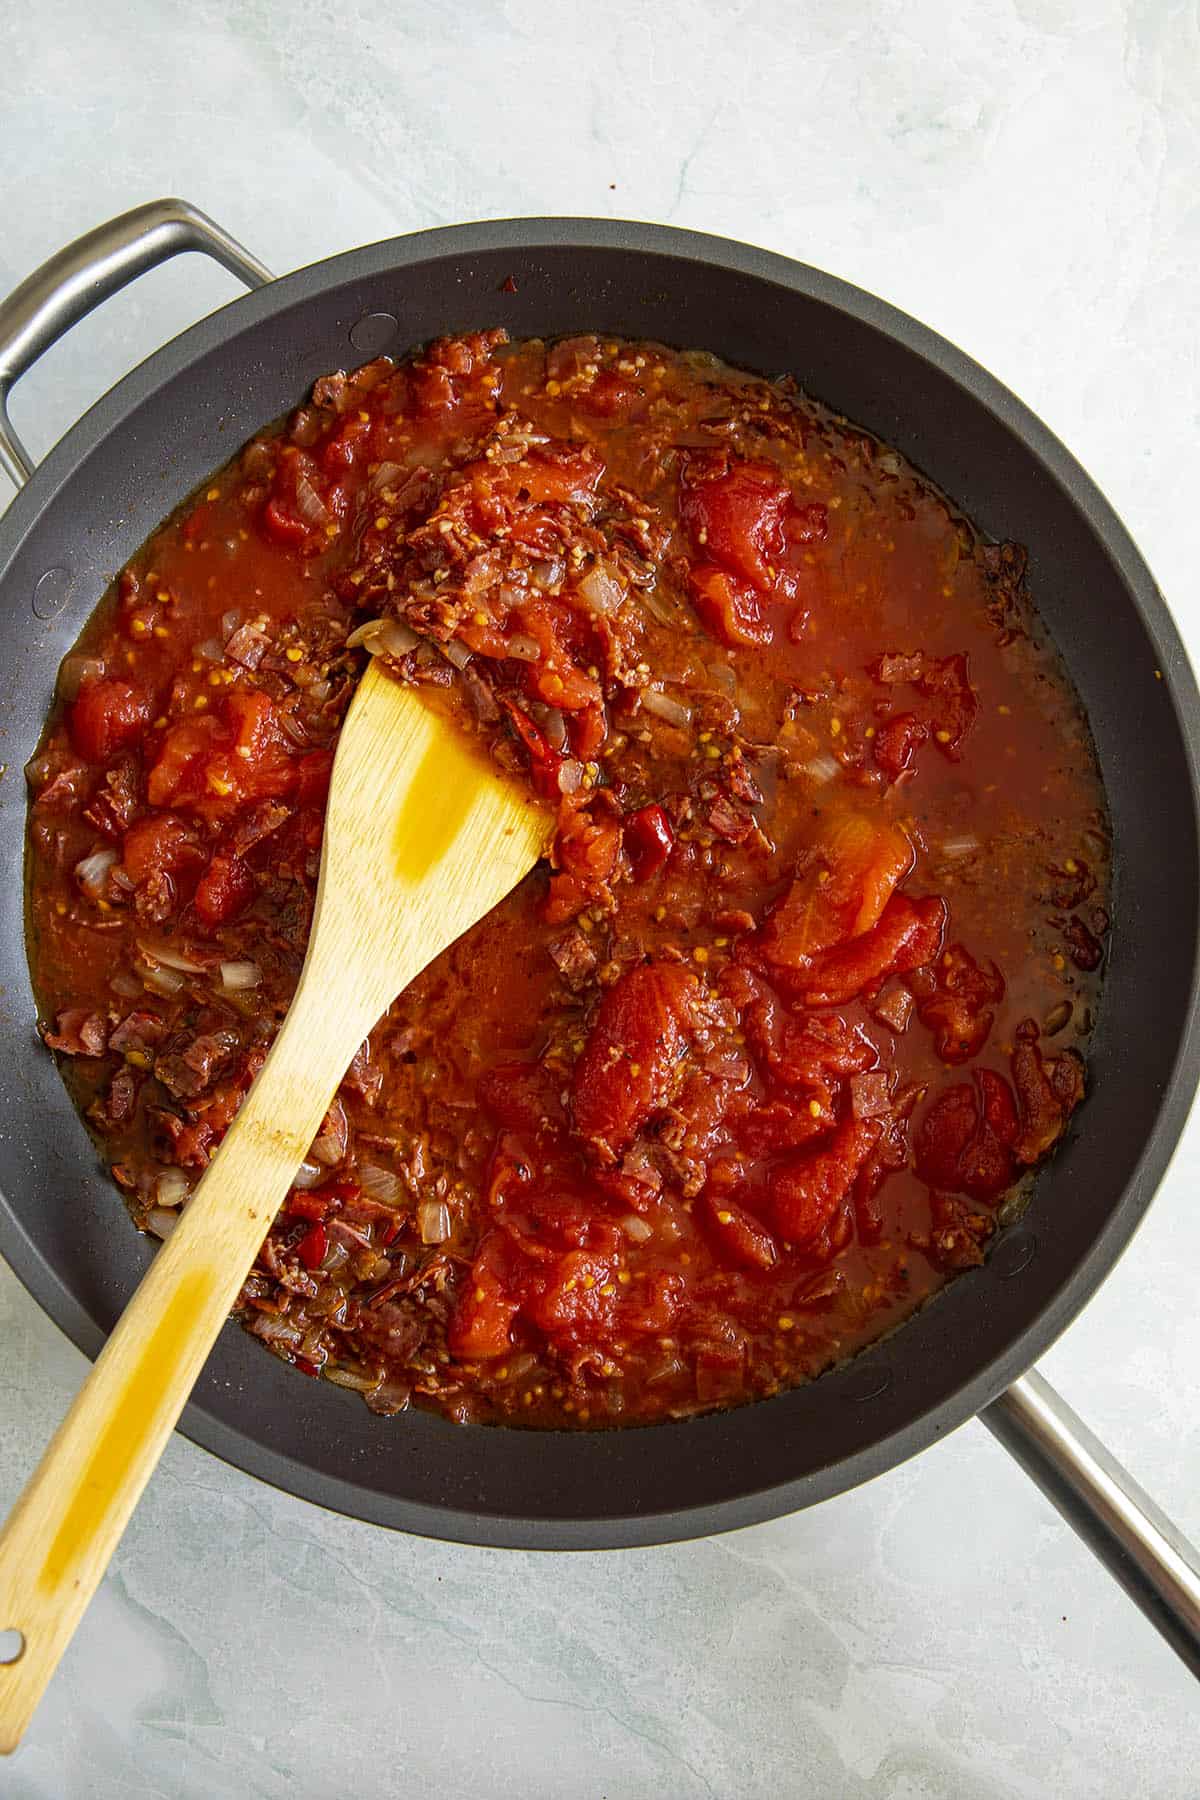 Stirring the Amatriciana sauce in a pan